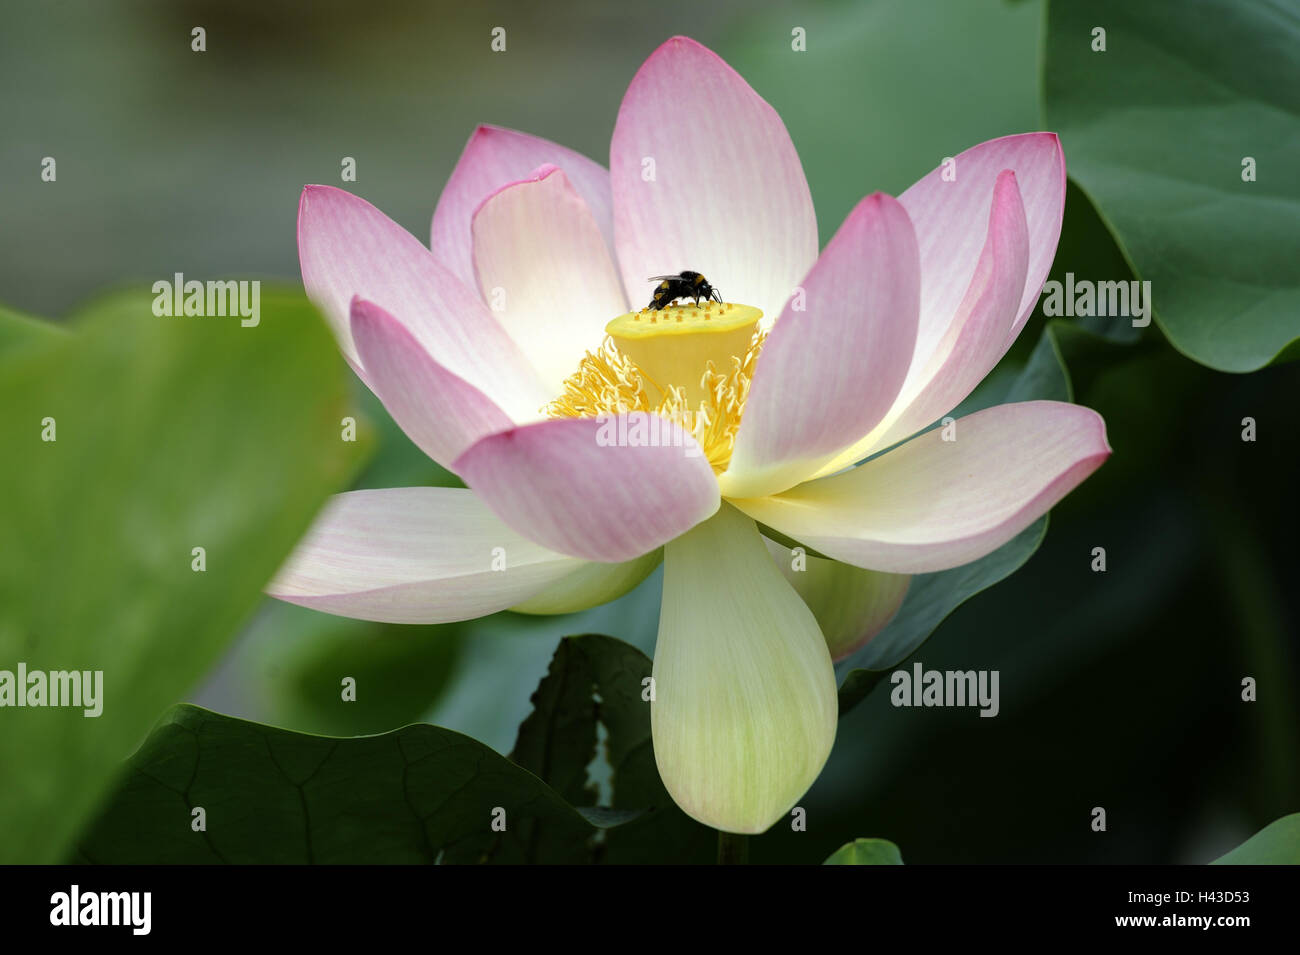 Lotus, bee, plant, water plant, Lotusblume, blossom, Lotosblüte, insect, period of bloom, Stock Photo